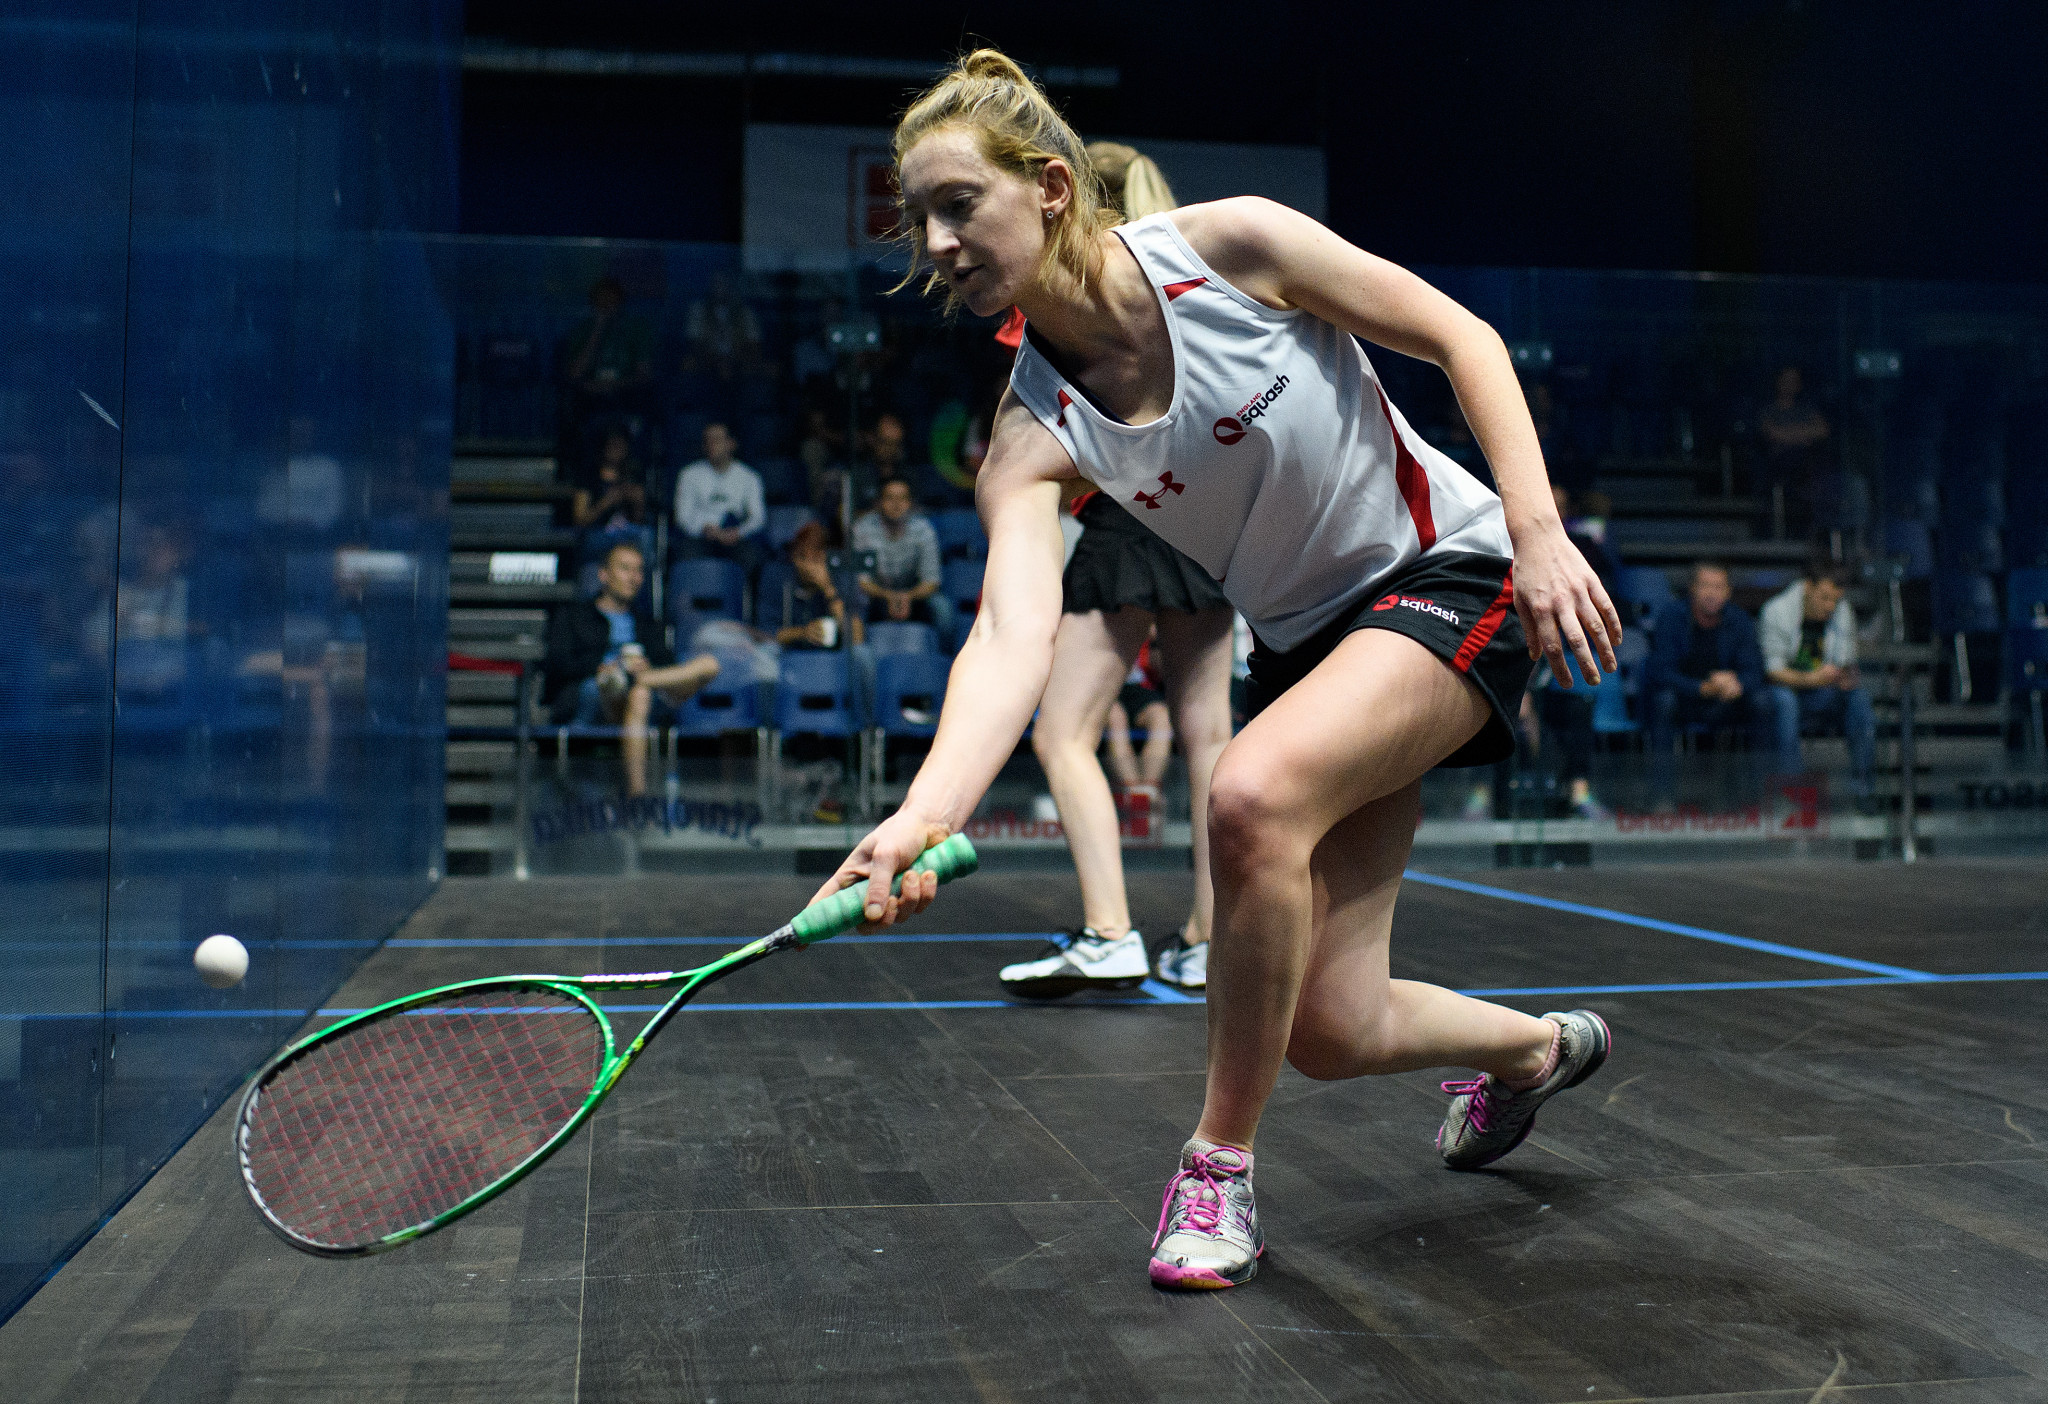 Millie Tomlinson has broken into the top 20 of the women's Professional Squash Association rankings for the first time ©Getty Images